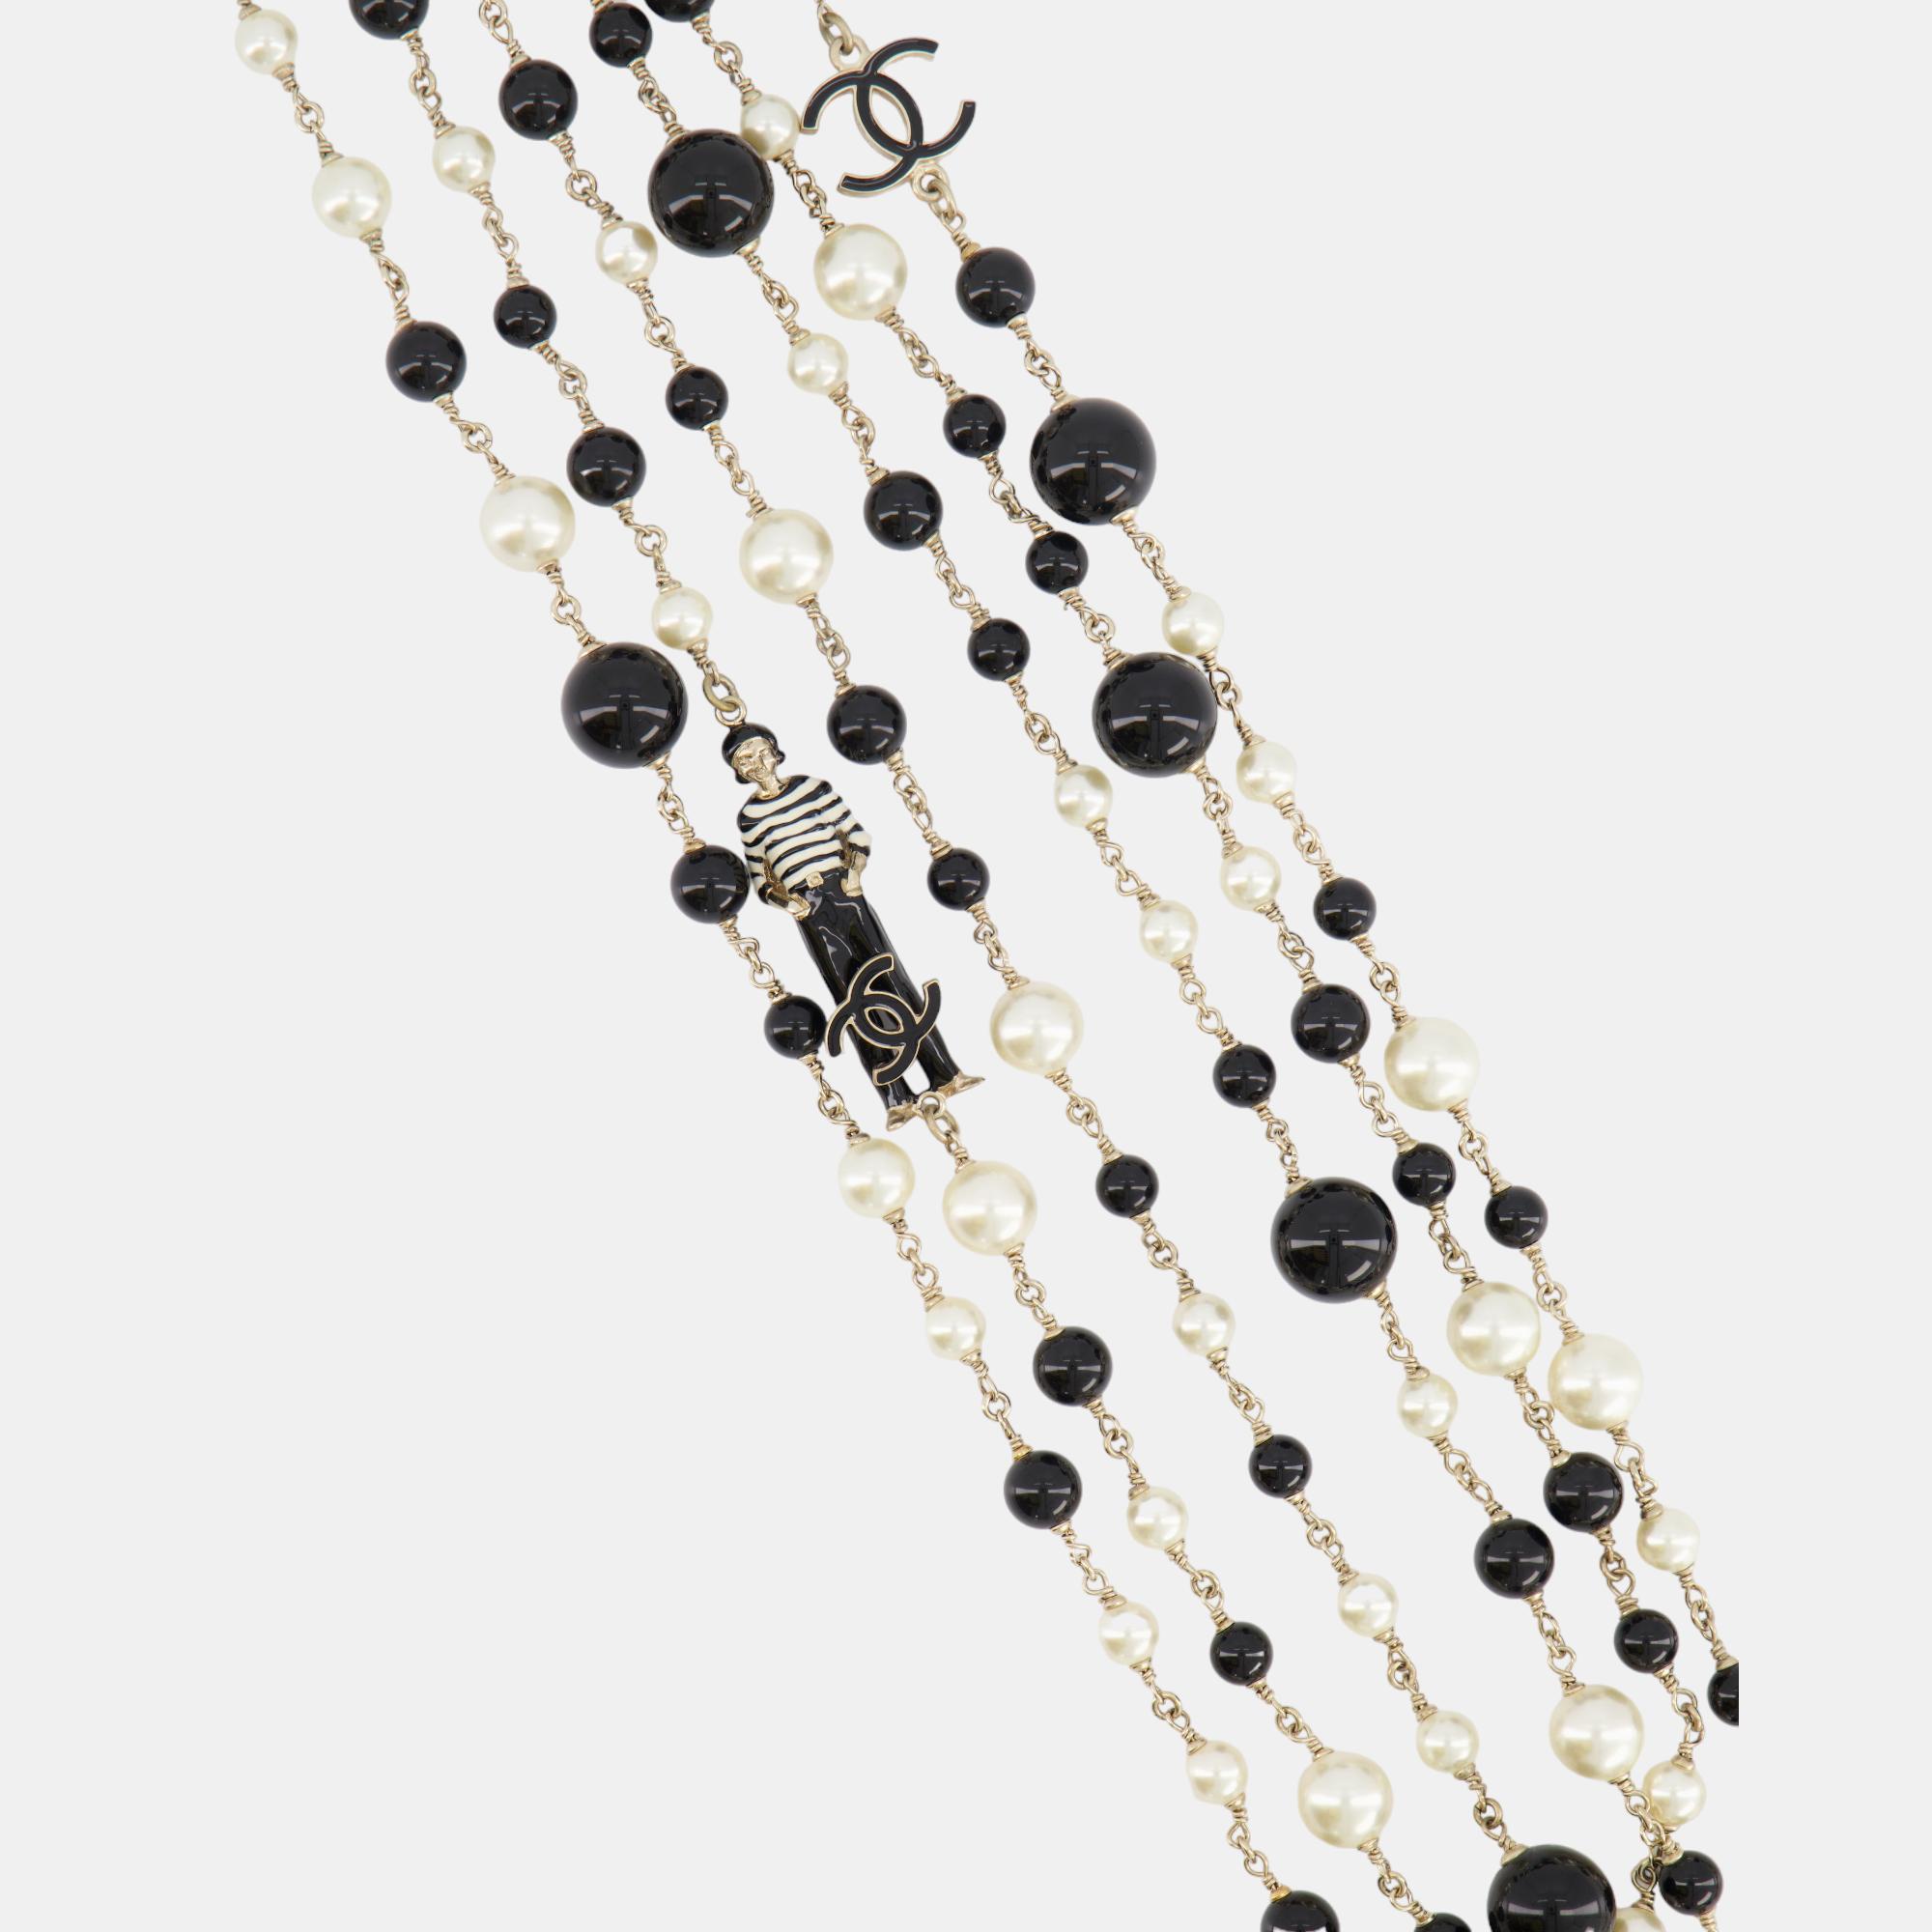 Chanel Black And White Pearl Glass Necklace With Gold Chain And CC Logo Details